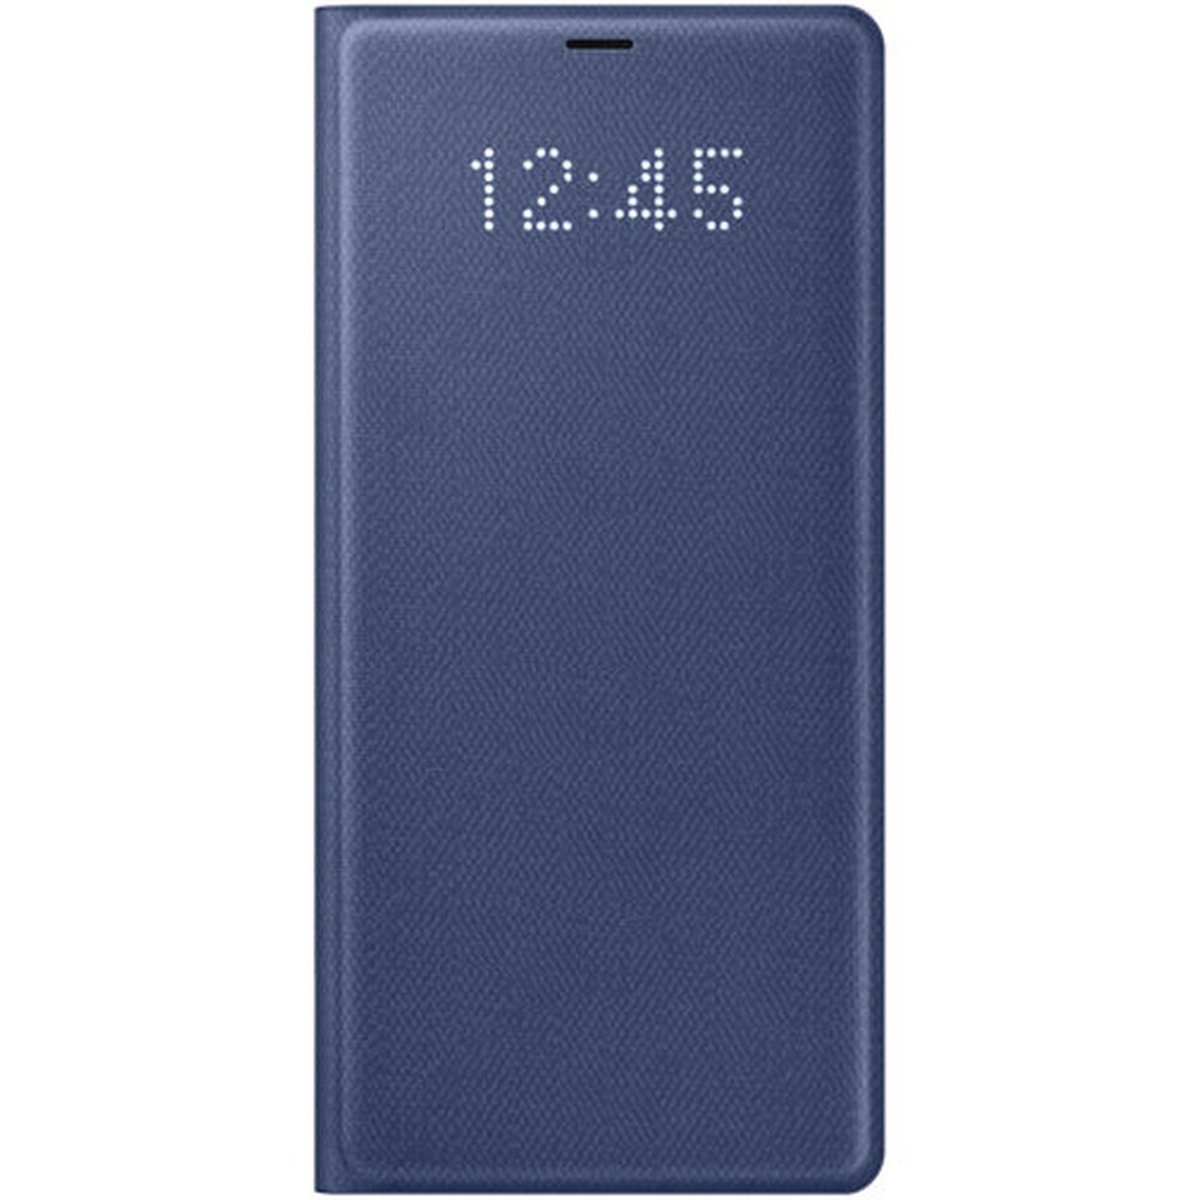 Galaxy Note8 LED View Cover NN950 Blue